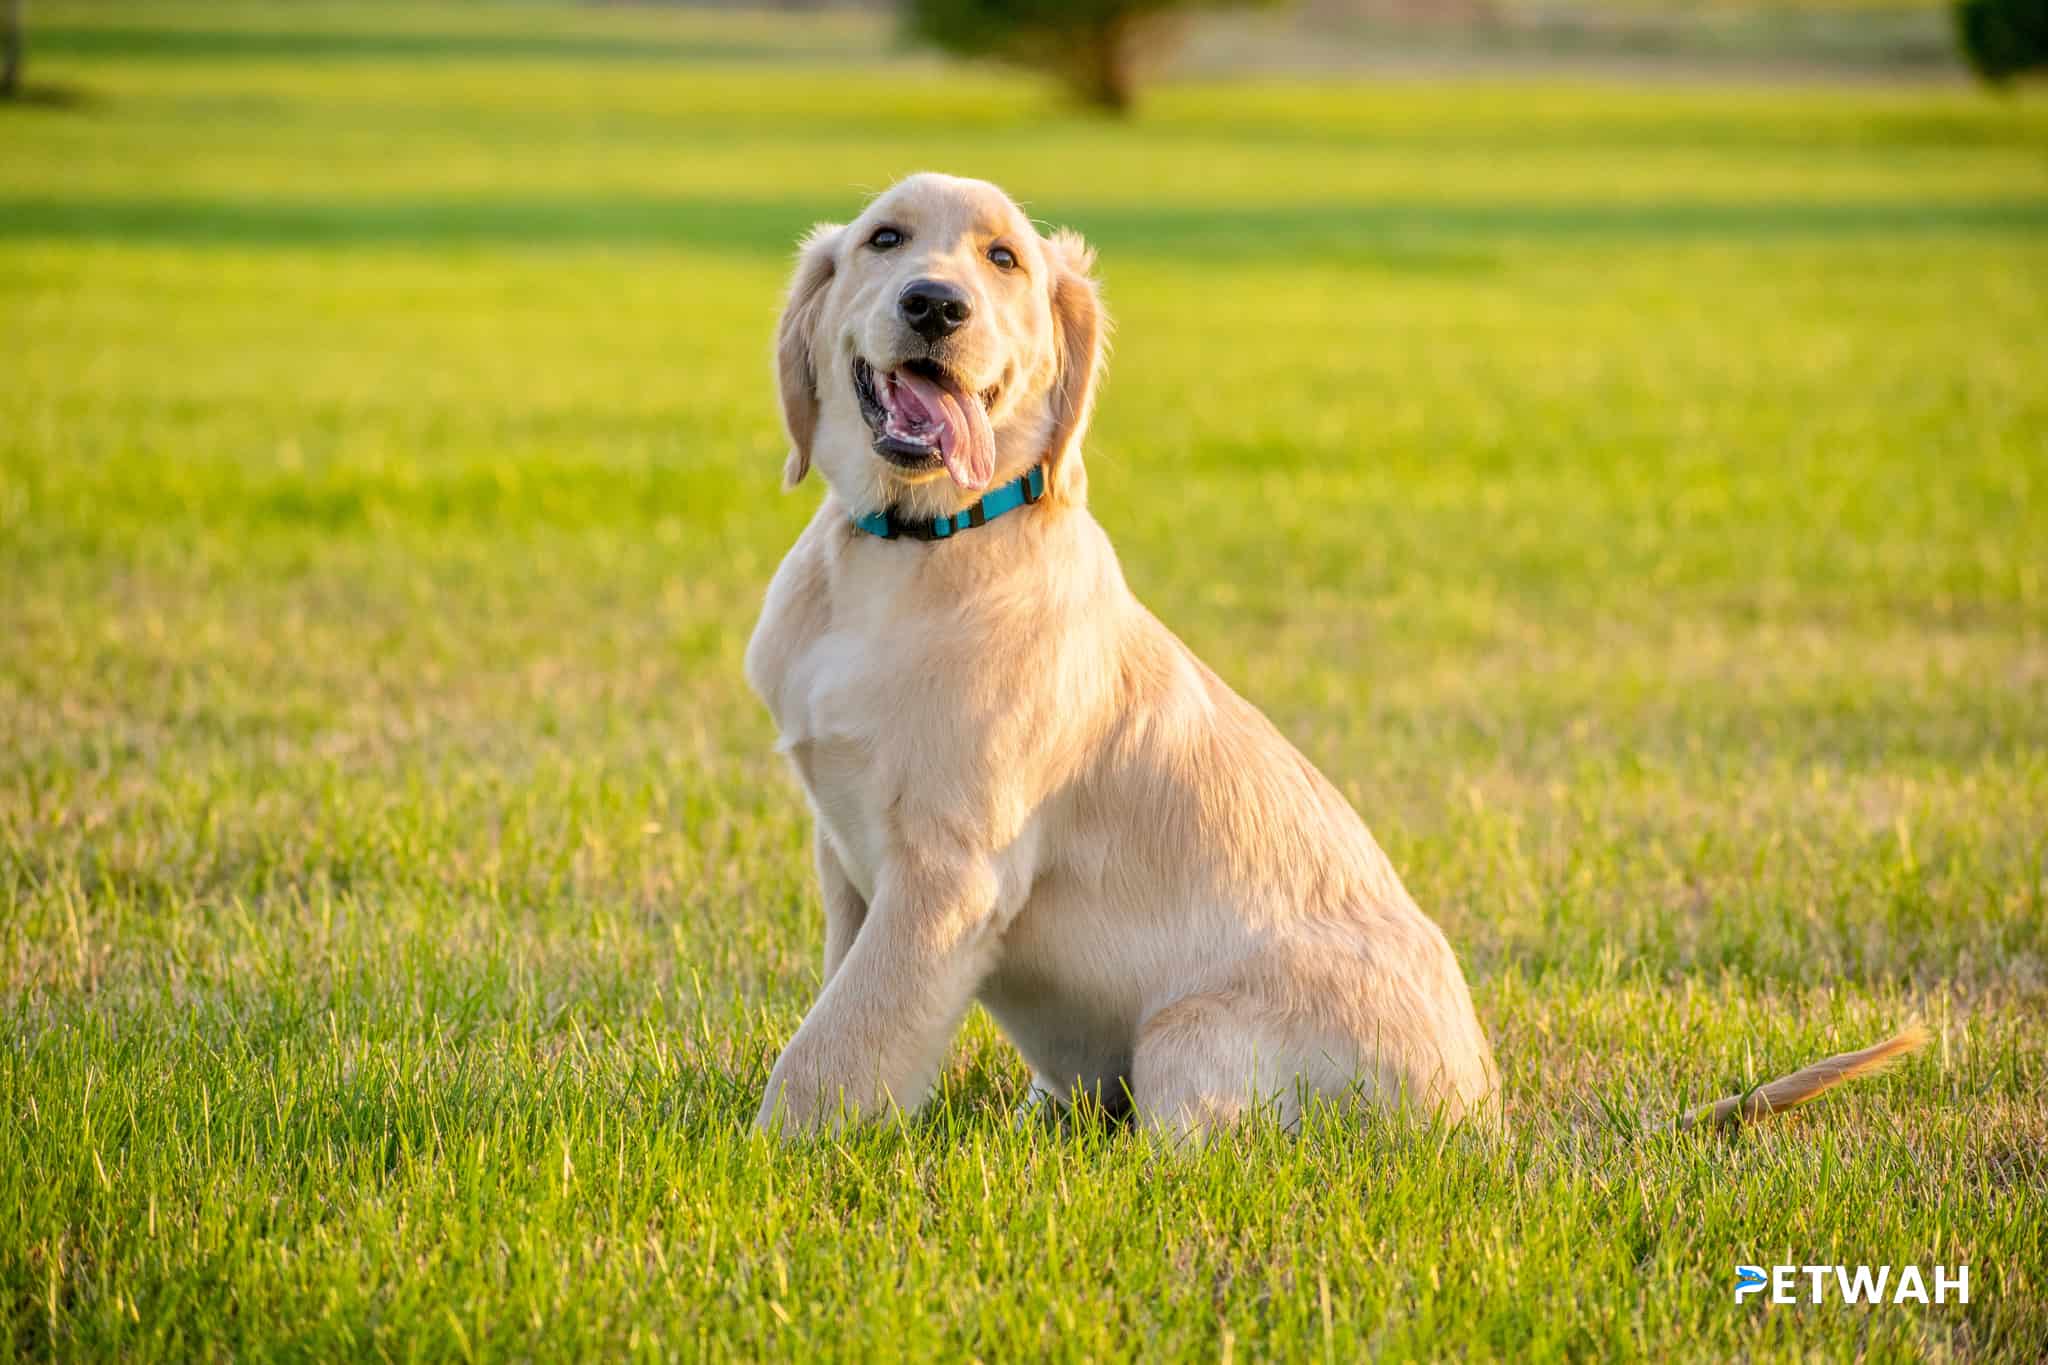 Resources and Support Groups for Couples Raising a Golden Retriever